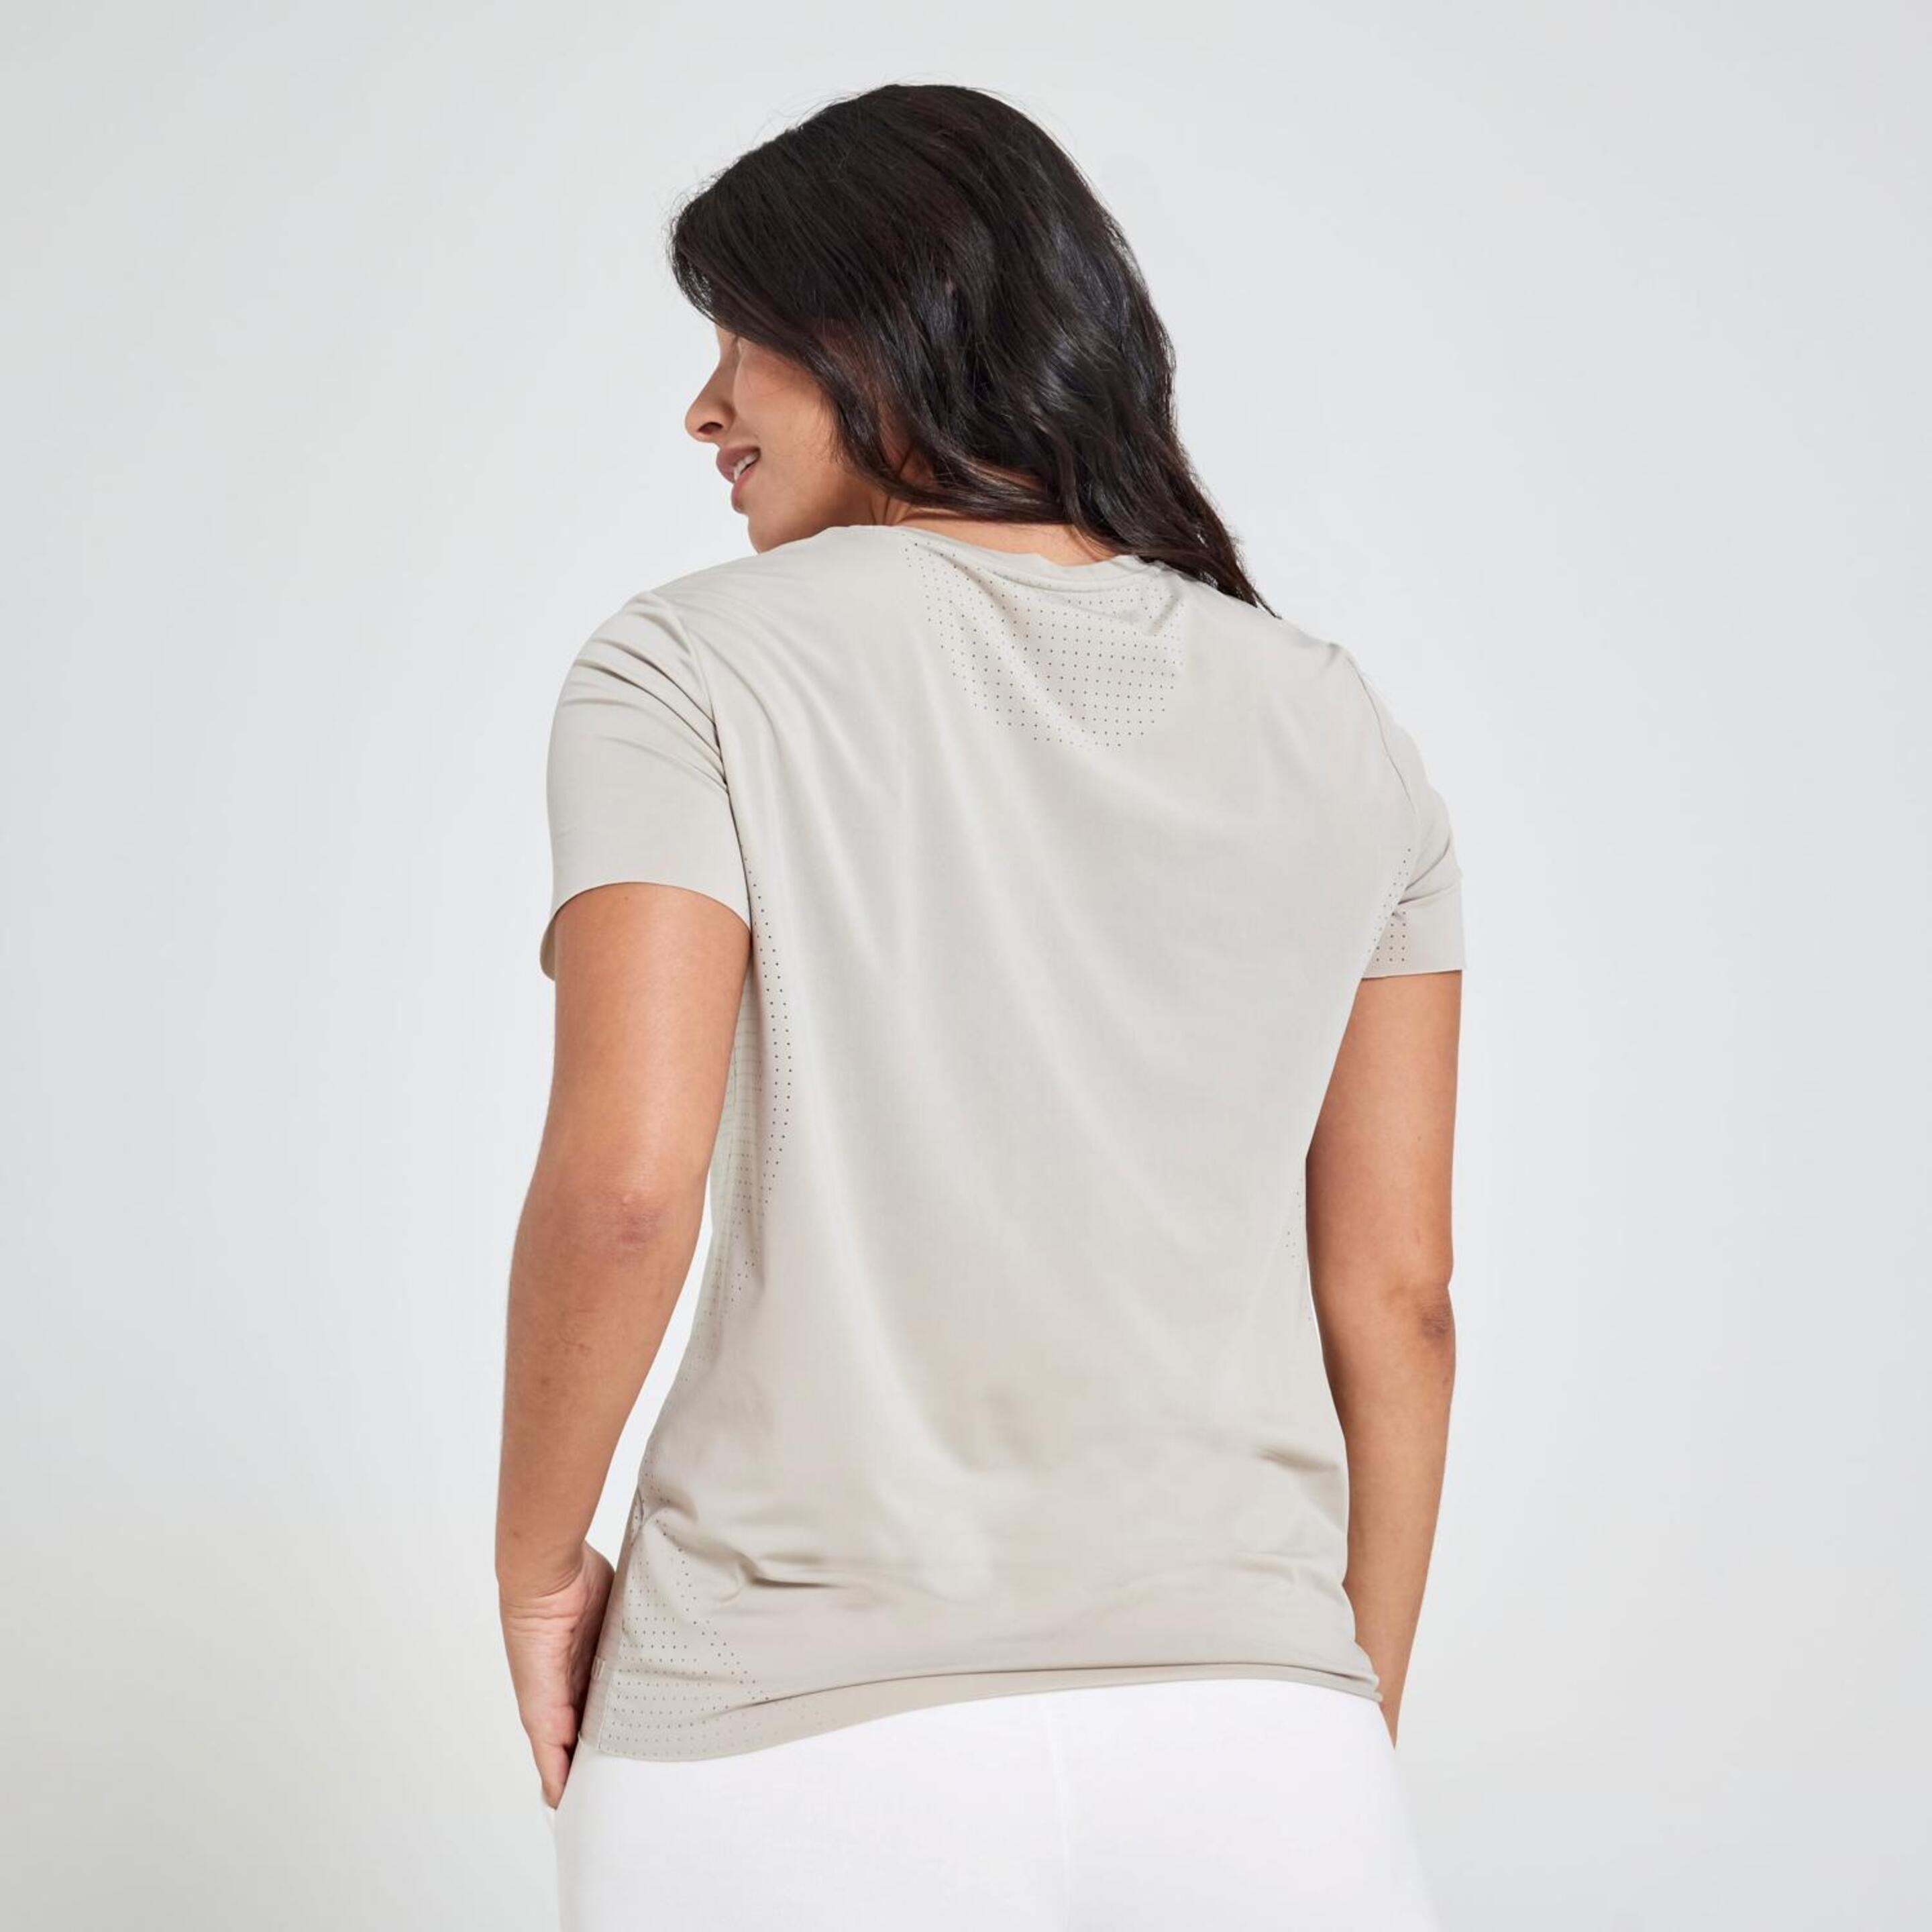 Doone Casual Luxe - Bege - T-shirt Mulher | Sport Zone